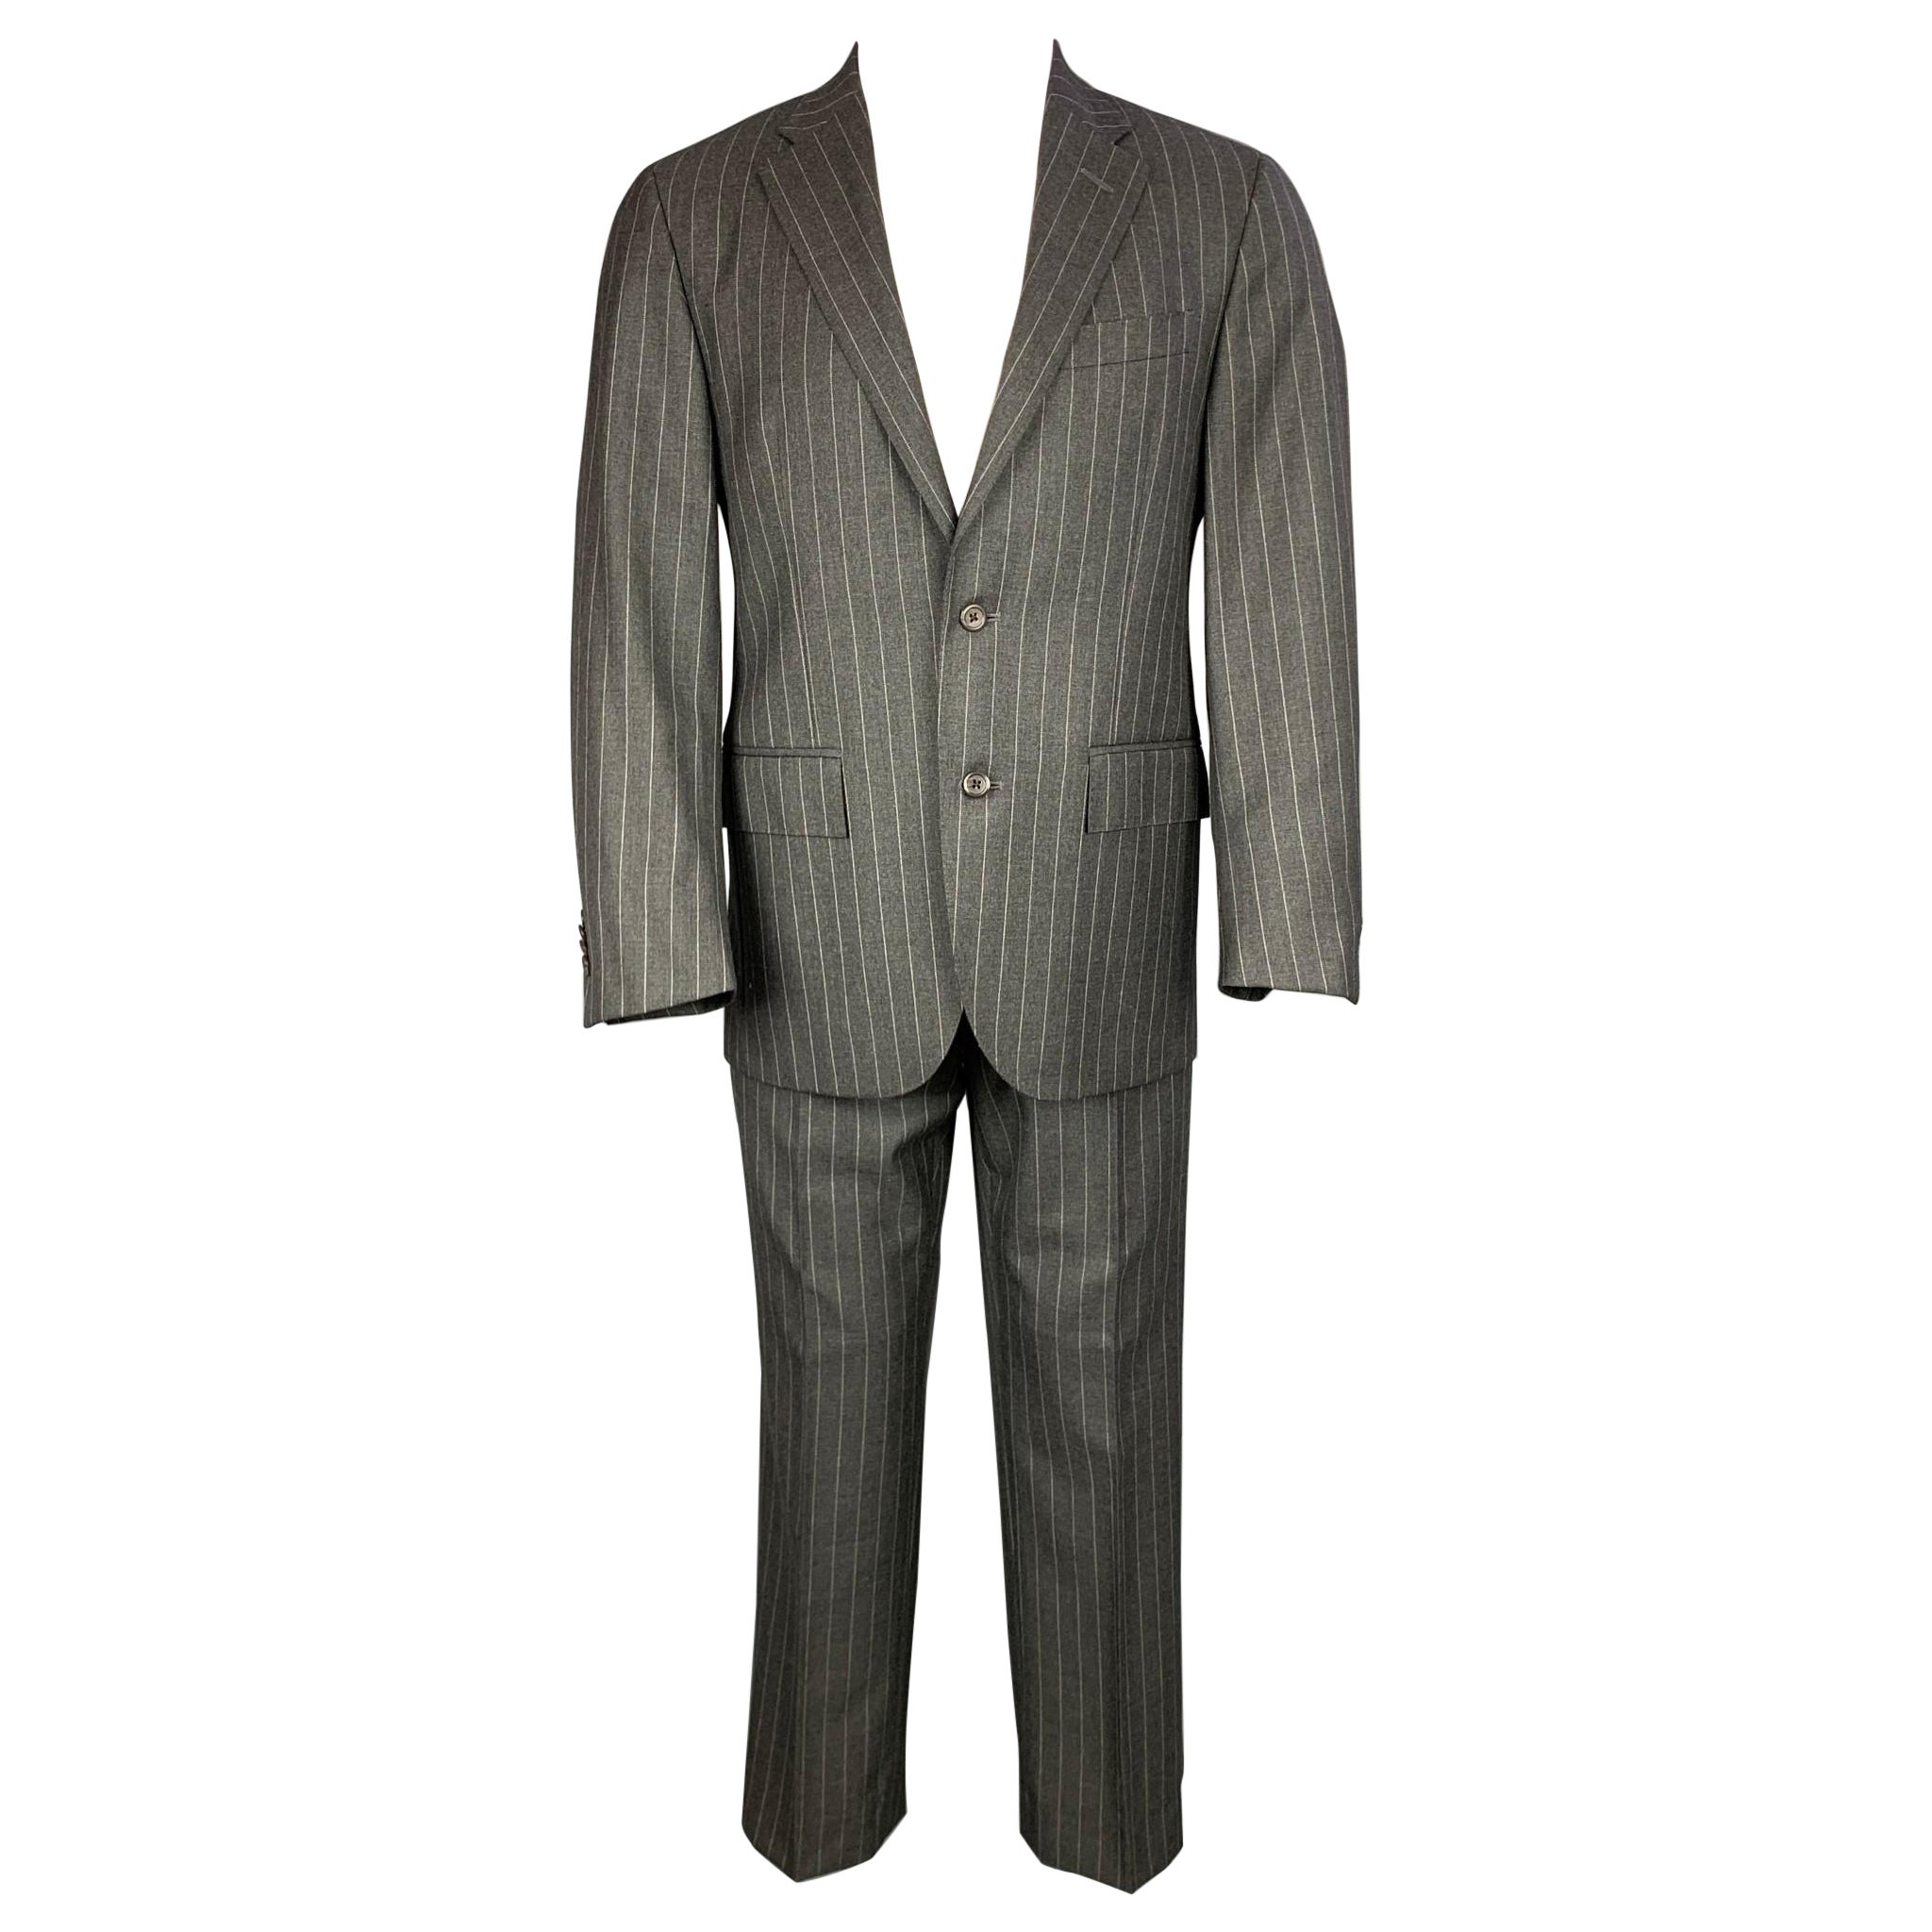 HICKORY STRIPED FLAT FRONT WOOL BLEND MORNING SUIT TROUSER MEN'S size 28 to 38 